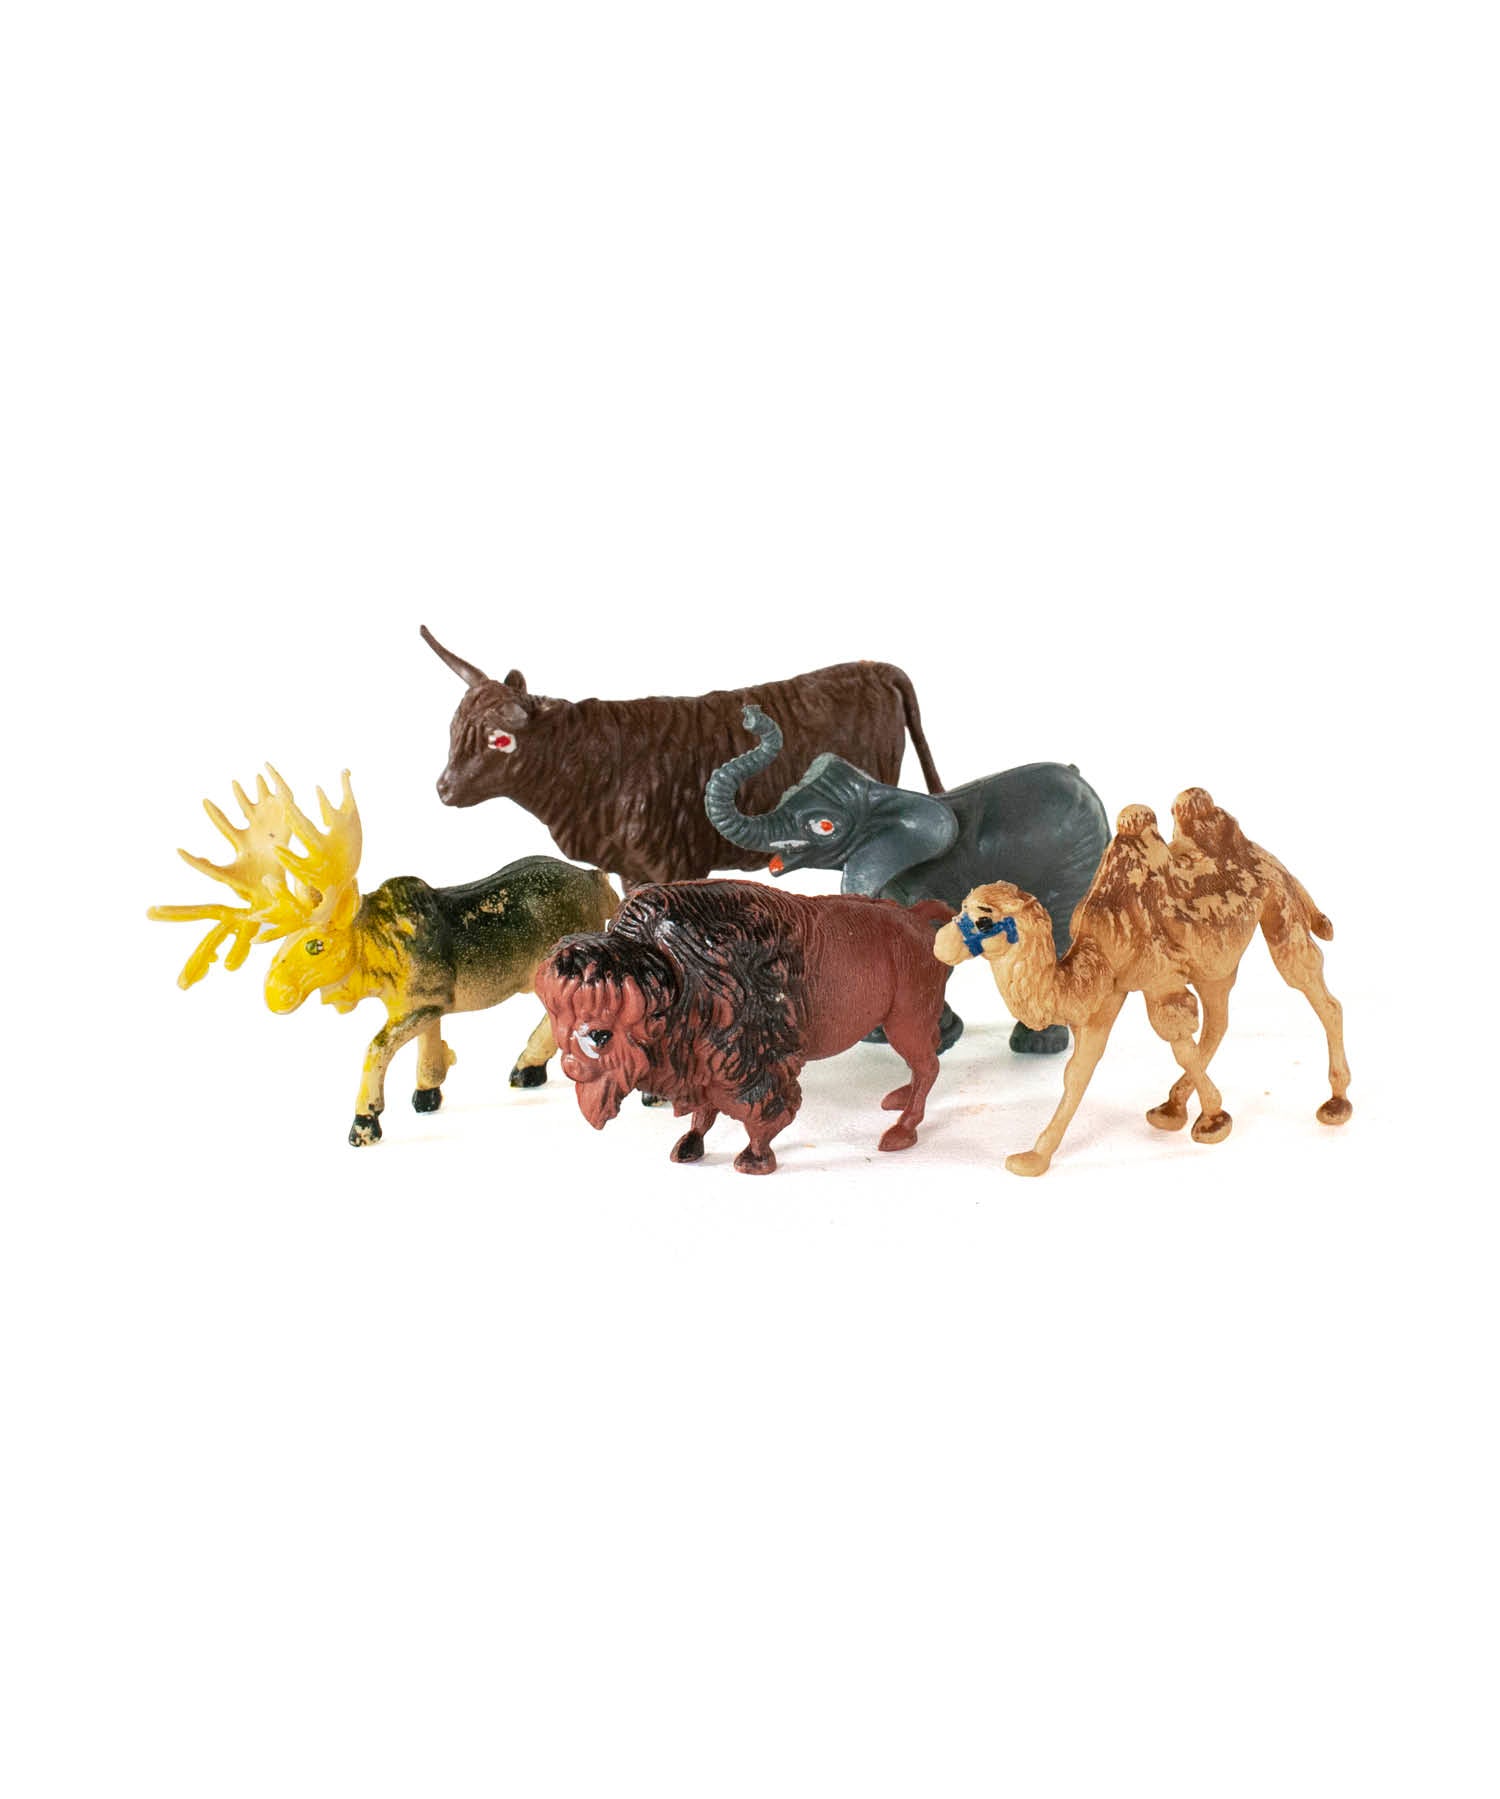 Vintage Object : Small Animals | LIKE THIS SHOP